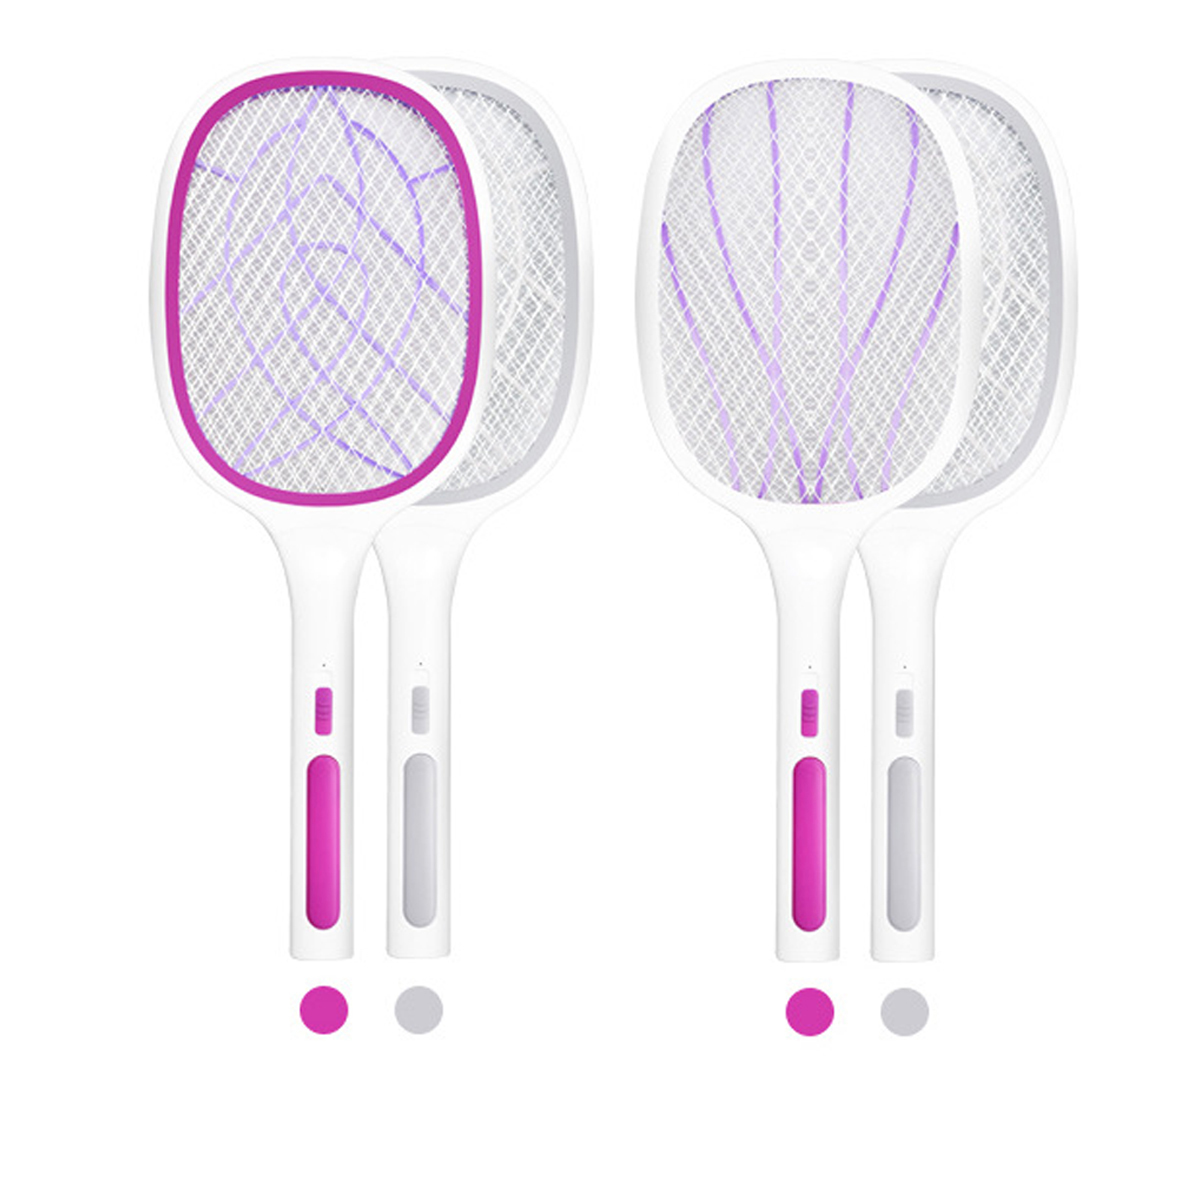 106LED-Electric-Flies-Mosquito-Swatter-3000V-Anti-Mosquito-Fly-Bug-Zapper-Racket-Rechargeable-Summer-1883413-12